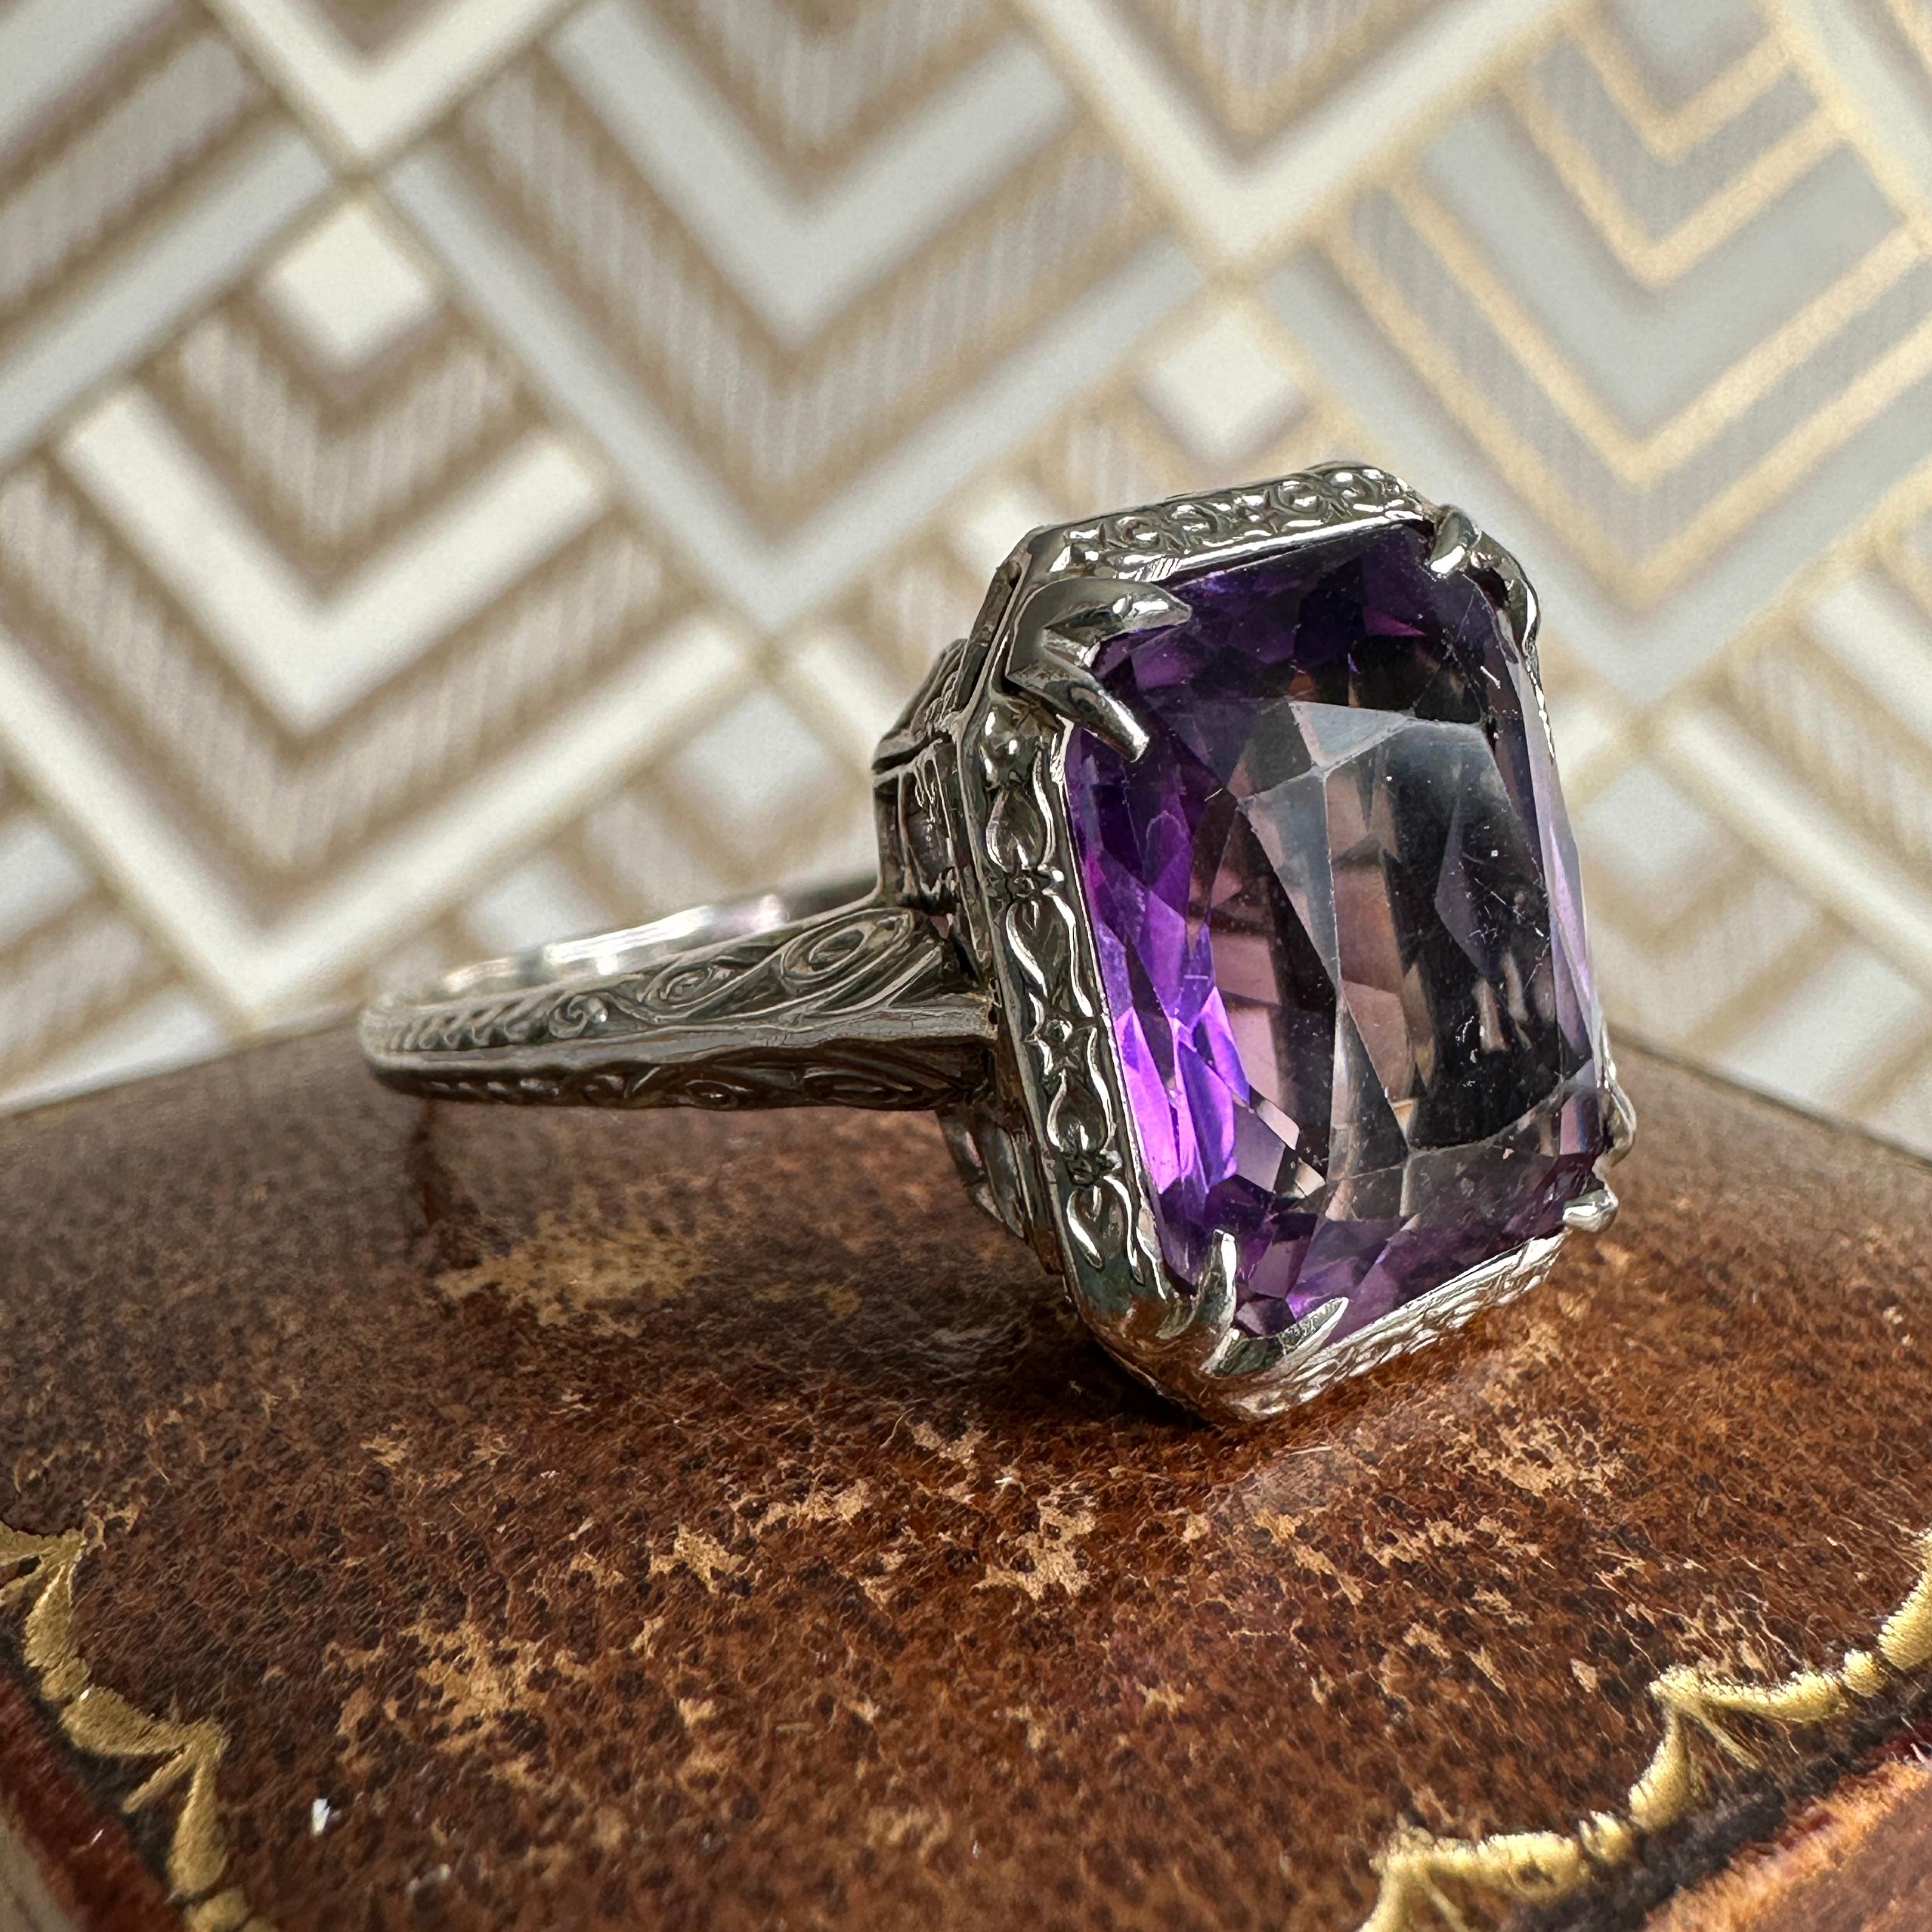 Details:
Sweet Edwardian Amethyst ring in 14K White Gold. The amethyst is a rich deep purple color, with lots of depth. Delicate filigree pattern sets up and frames the stone, with lovely engraving down the shanks. The bezel setting has pretty